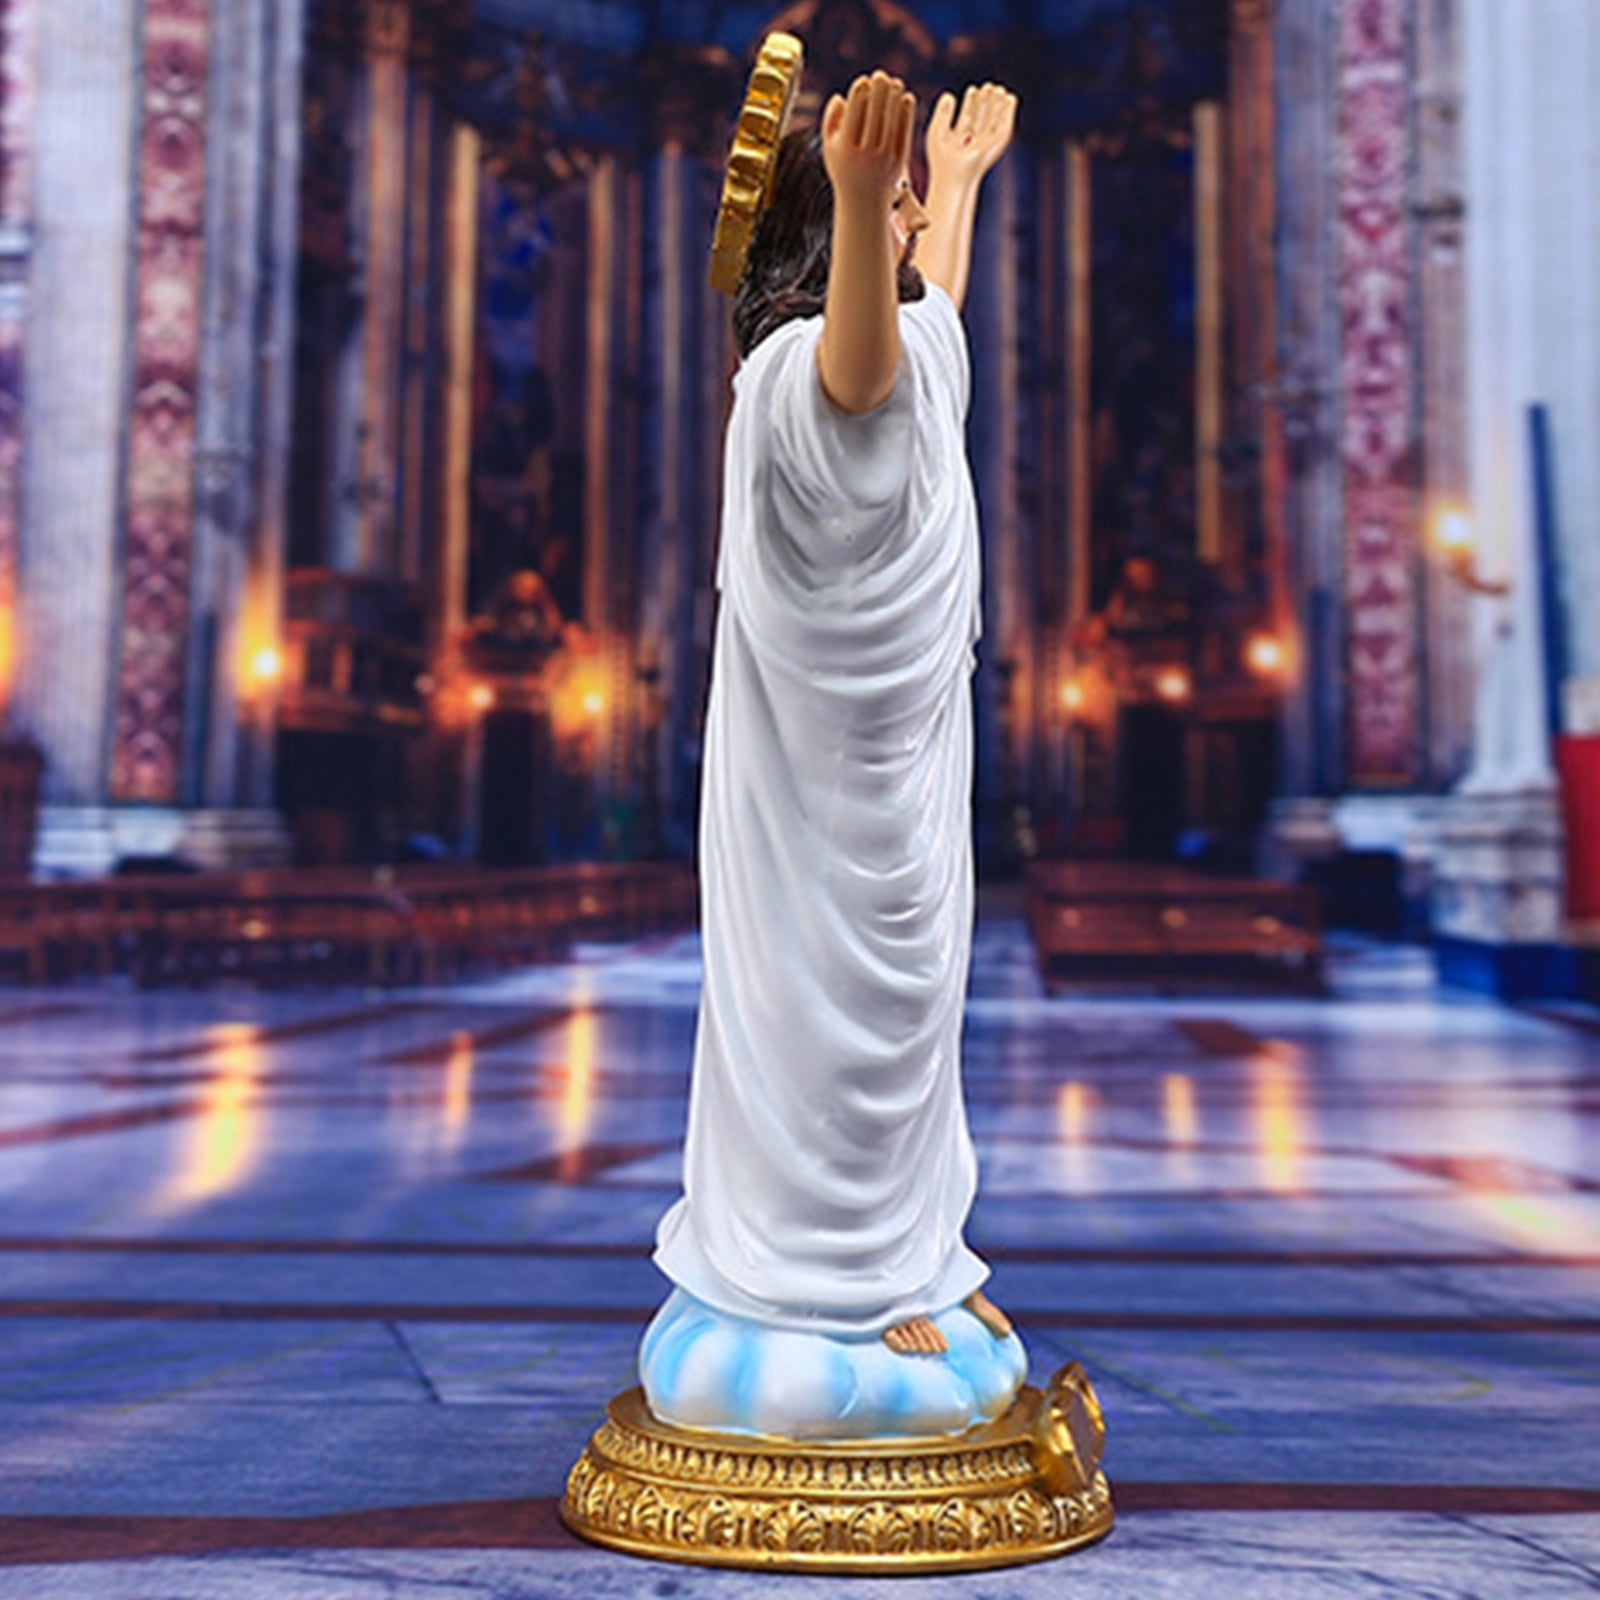 Buy Breeze Handicrafts Christian Gift Polyresin Statue of Jesus Christ  Resurrection Statue Catholic Religious Showpiece Decor Risen Jesus PRST 016  Online at Low Prices in India - Amazon.in